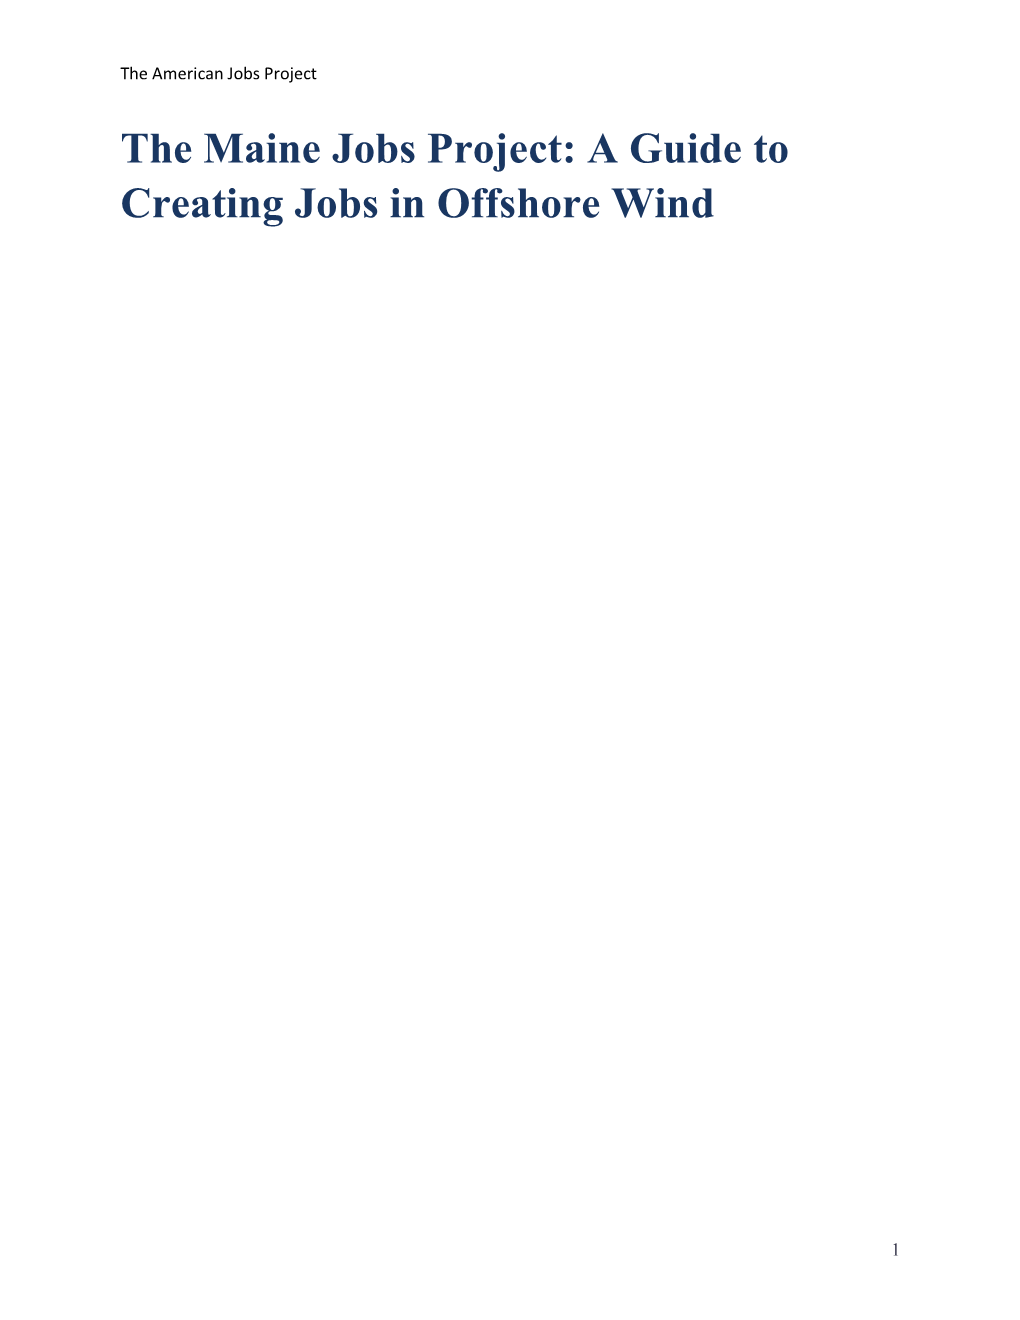 The Maine Jobs Project: a Guide to Creating Jobs in Offshore Wind